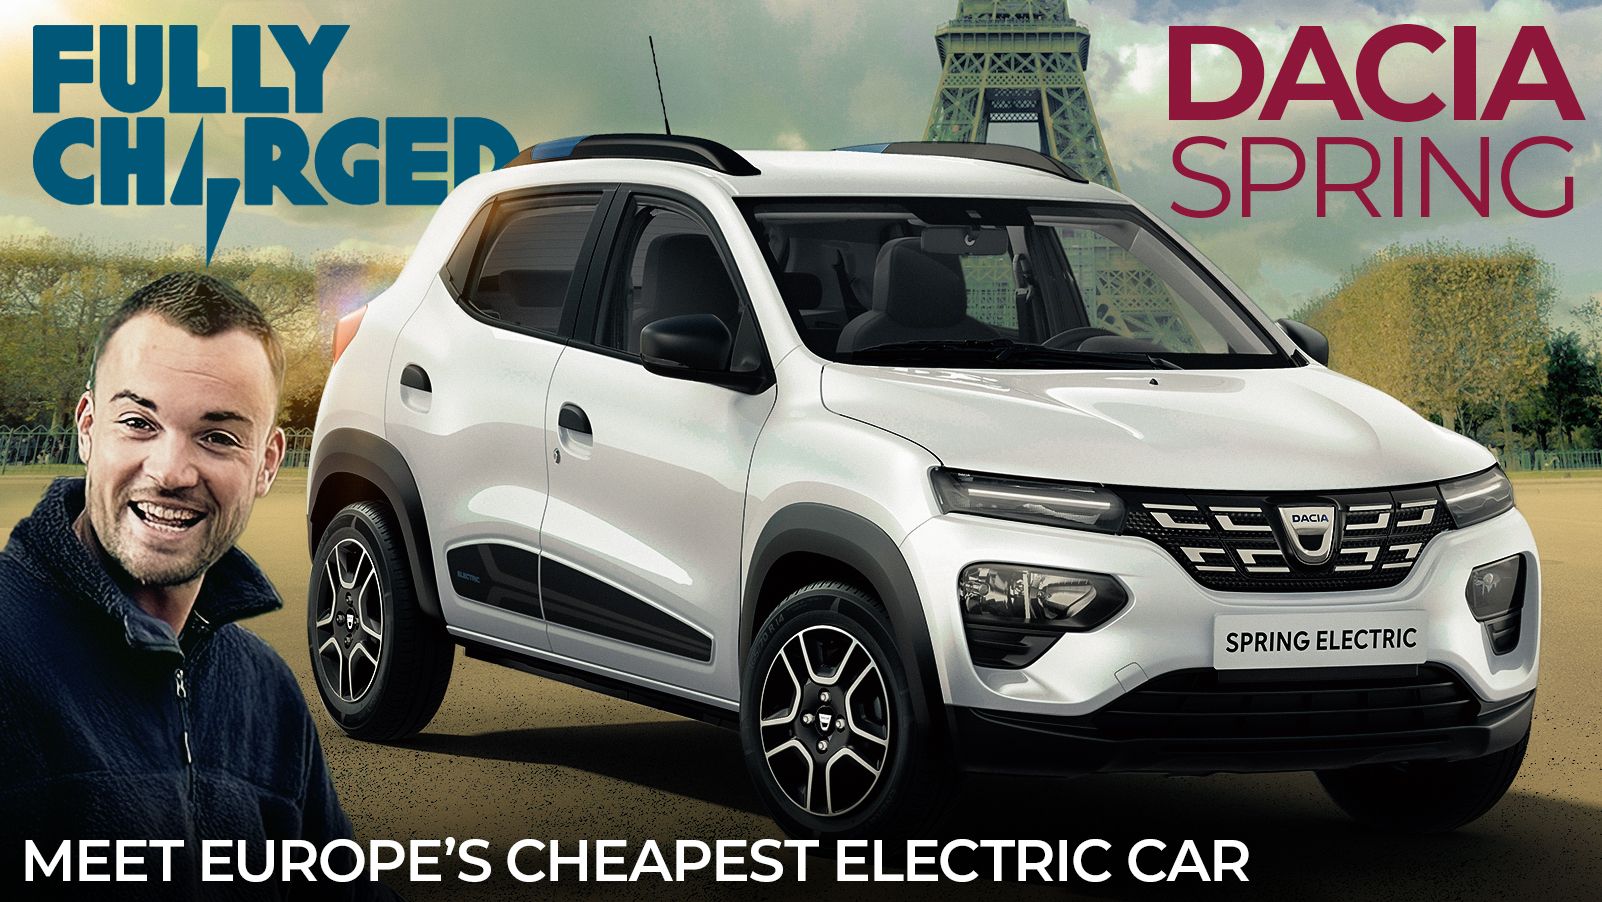 Dacia Spring vs Renault Zoe: Similarities and Differences